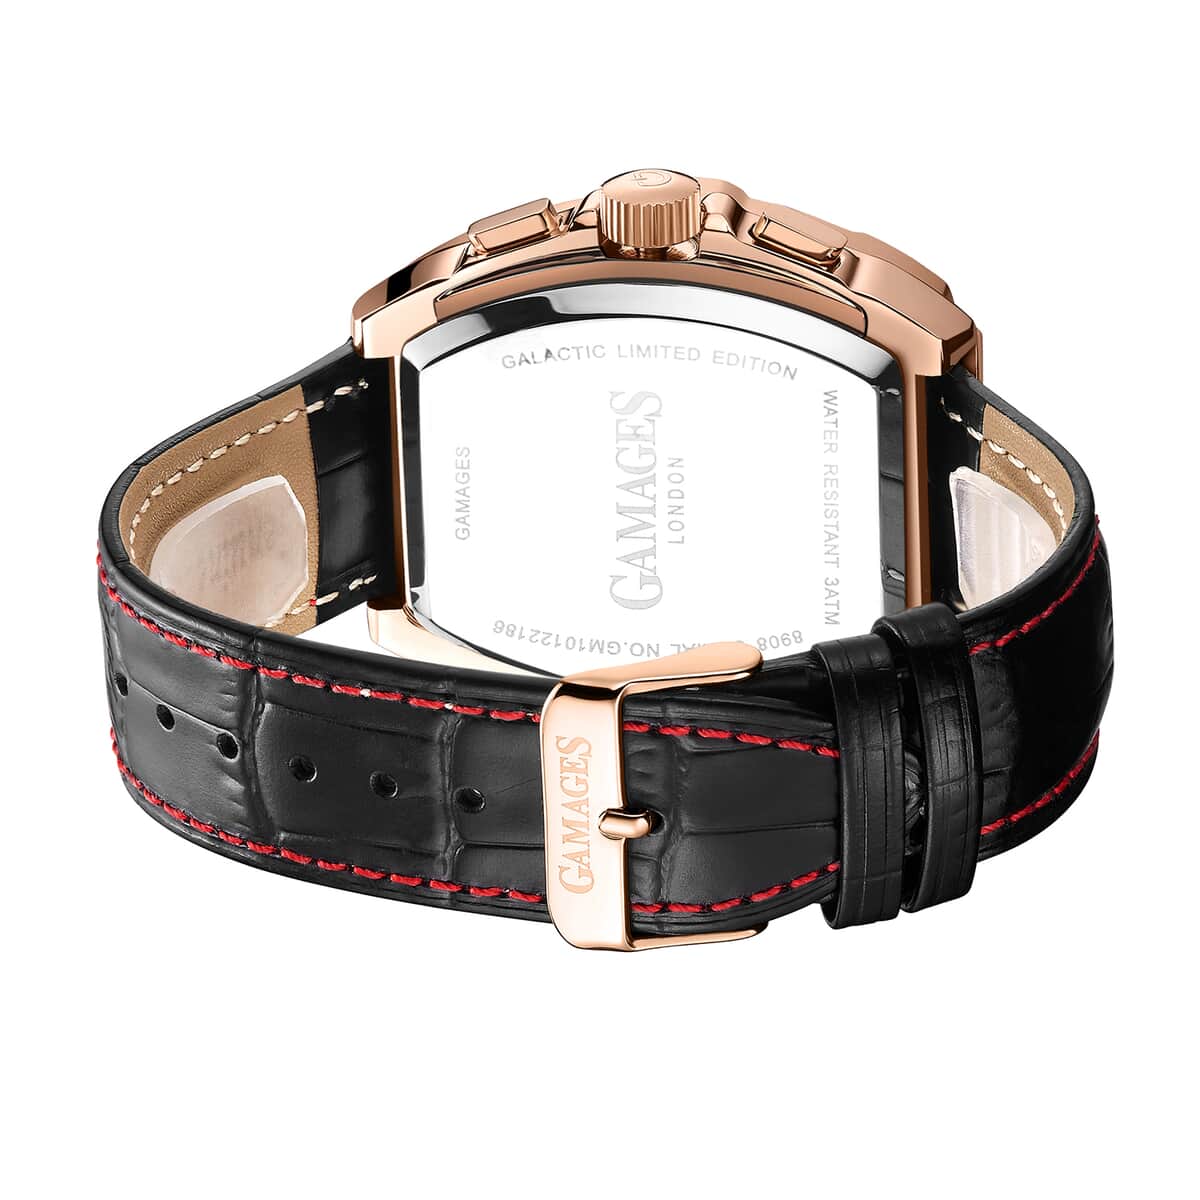 GAMAGES OF LONDON Limited Edition Hand Assembled Galactic Automatic Movement Genuine Leather Strap Watch in Rose (43mm) image number 2